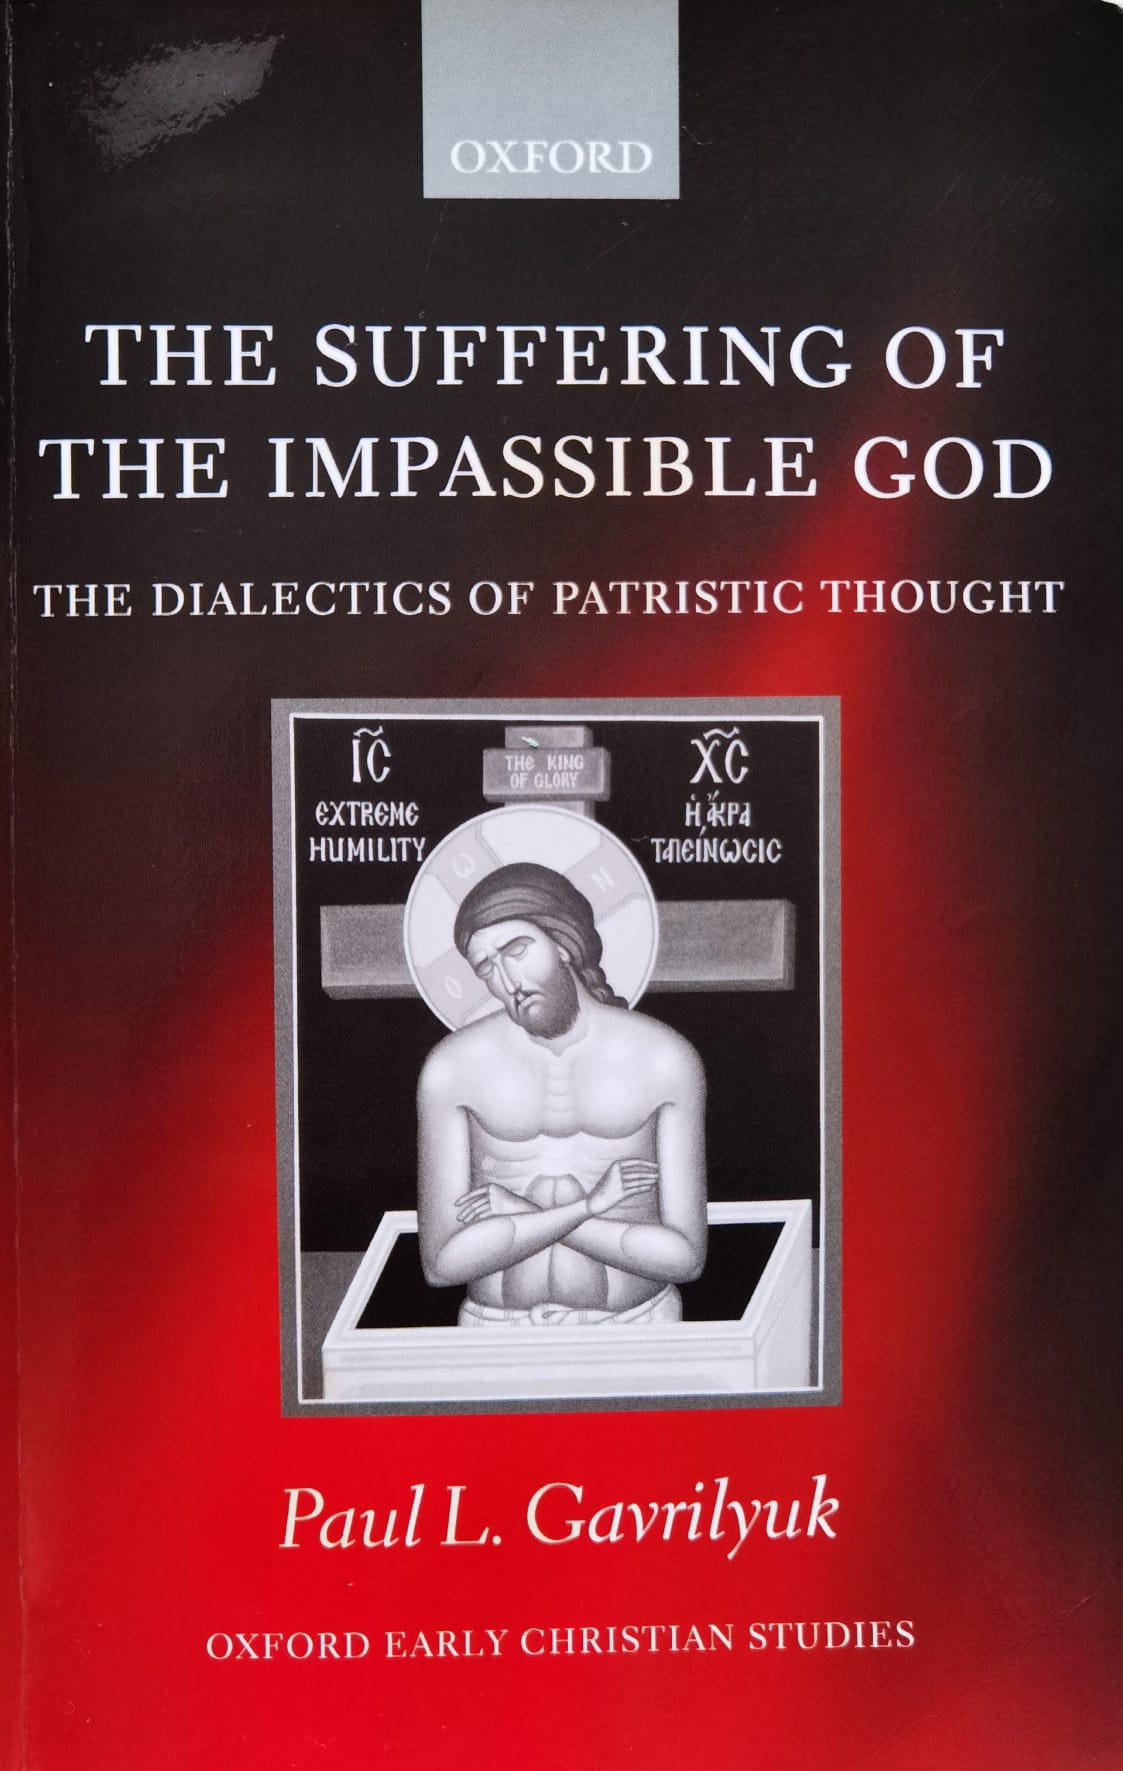 the suffering of the impassible god                                                                  paul l. gavrilyuk                                                                                   